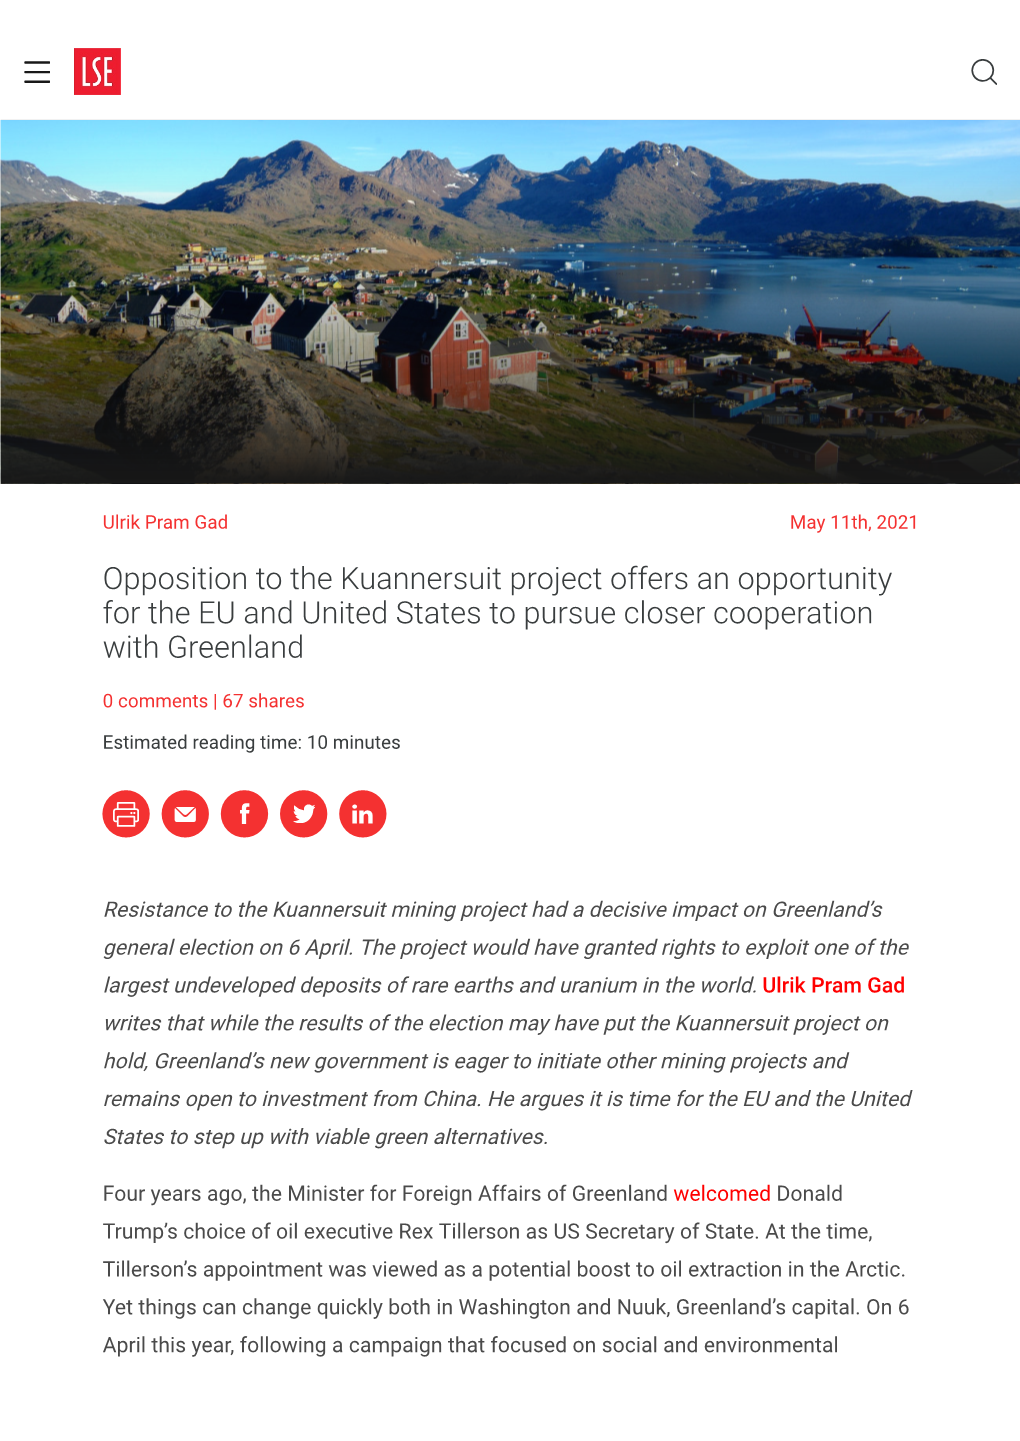 Opposition to the Kuannersuit Project Offers an Opportunity for the EU and United States to Pursue Closer Cooperation with Greenland